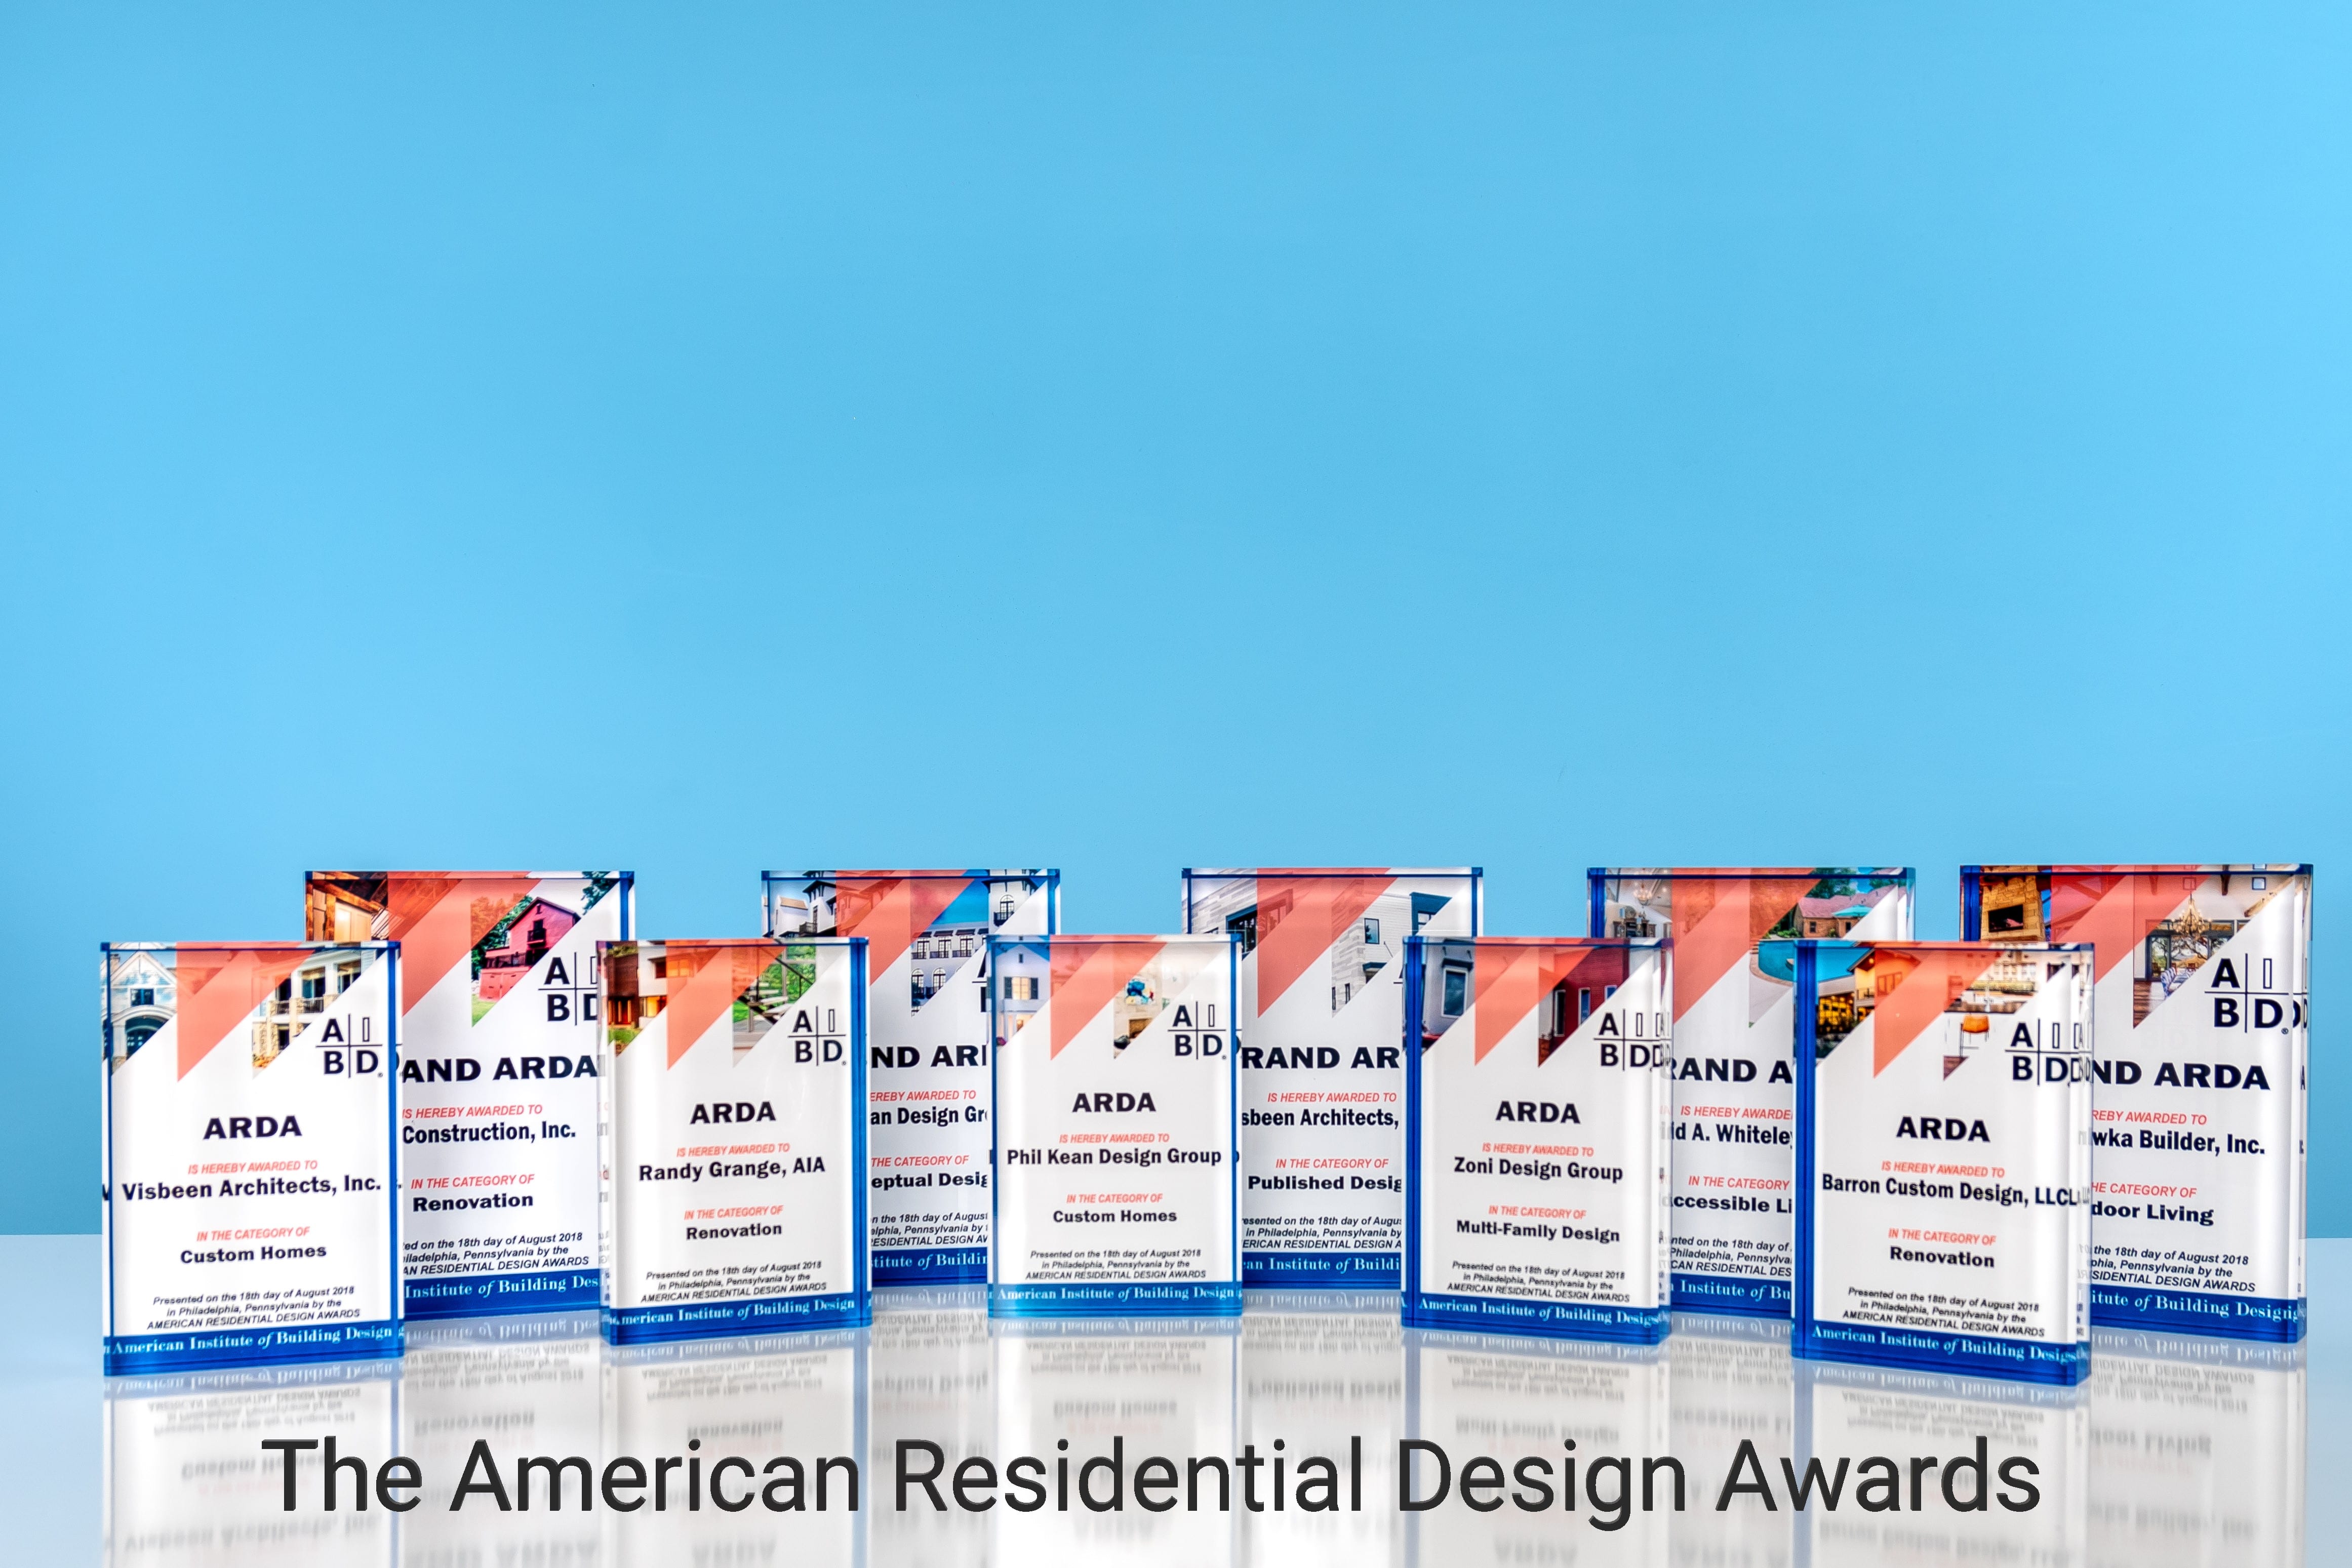 Ten (10) ARDA trophies in a row on a blue background with text below that says The American Residential Design Awards.